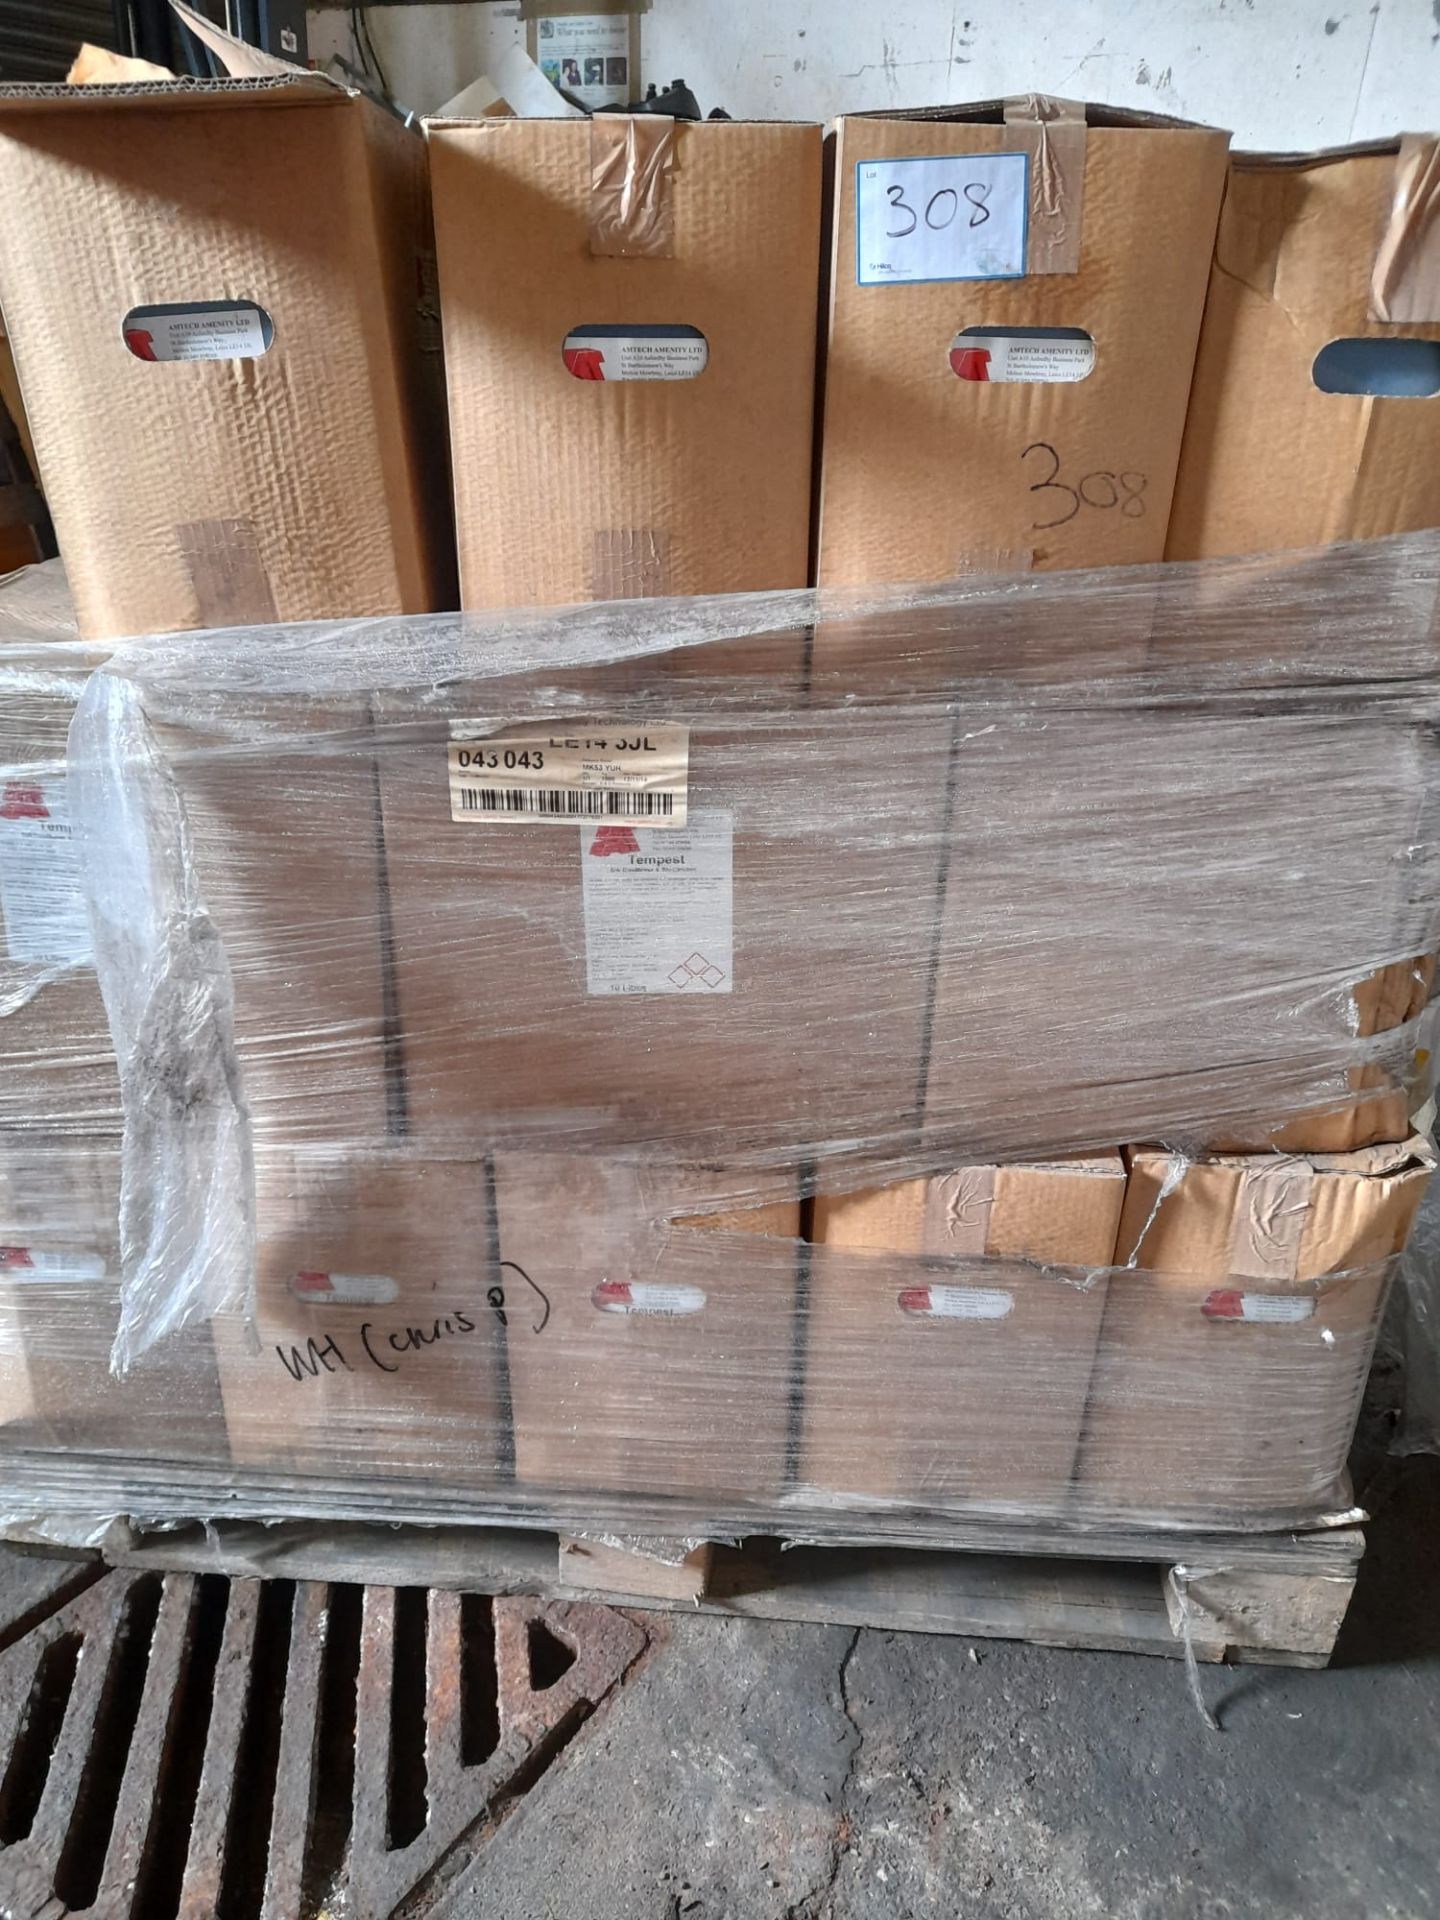 Pallet Of Approximately 58 Tubs Tempest Soil Conditioner And Bio-Stimulant - Image 2 of 2